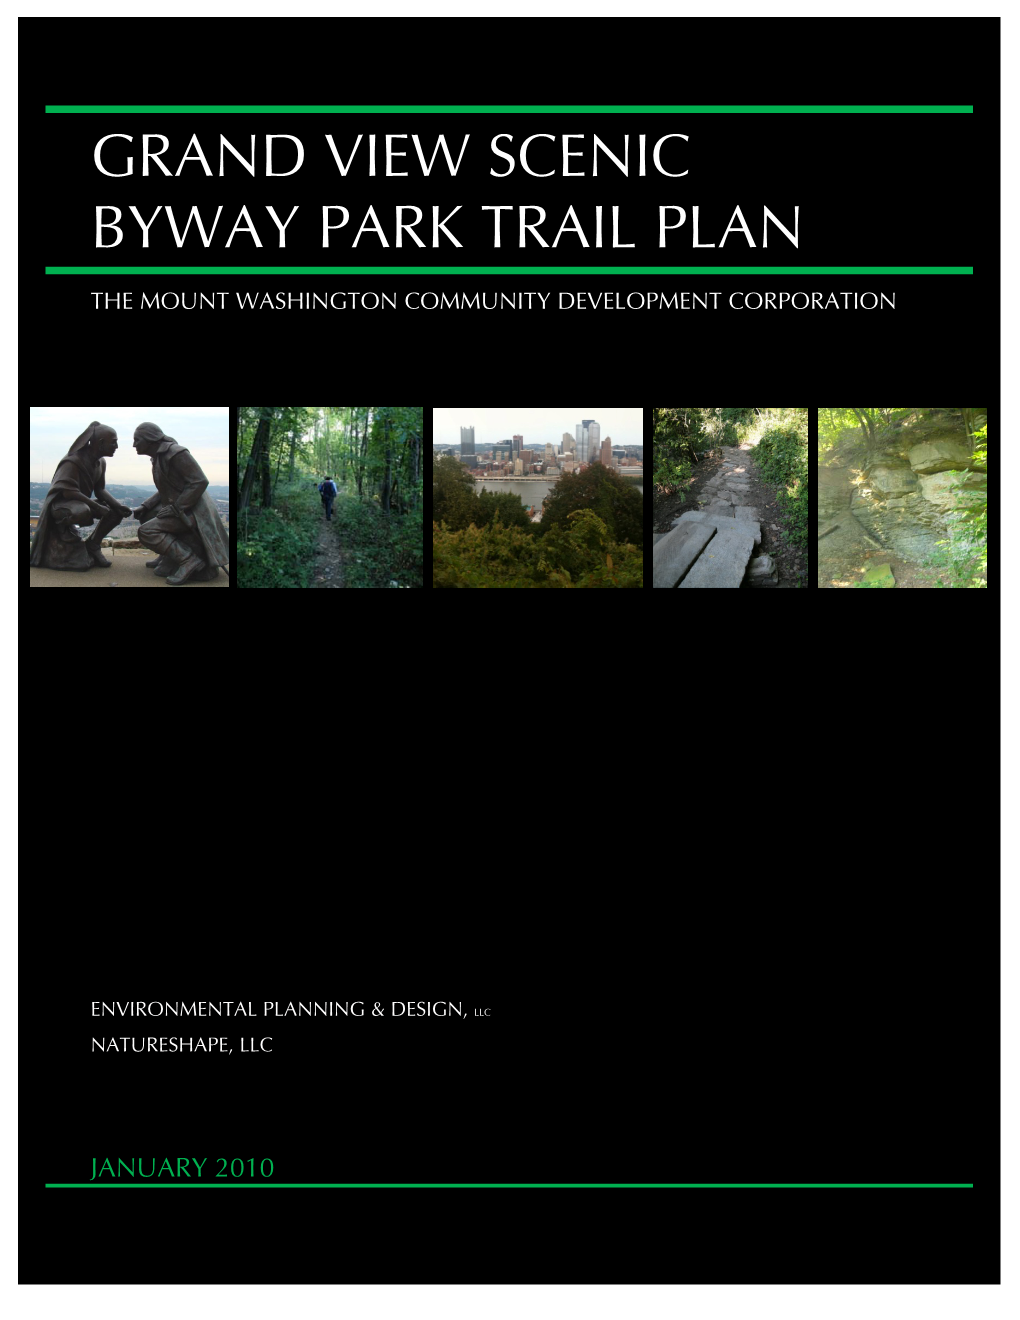 Grand View Scenic Byway Park Trail Plan